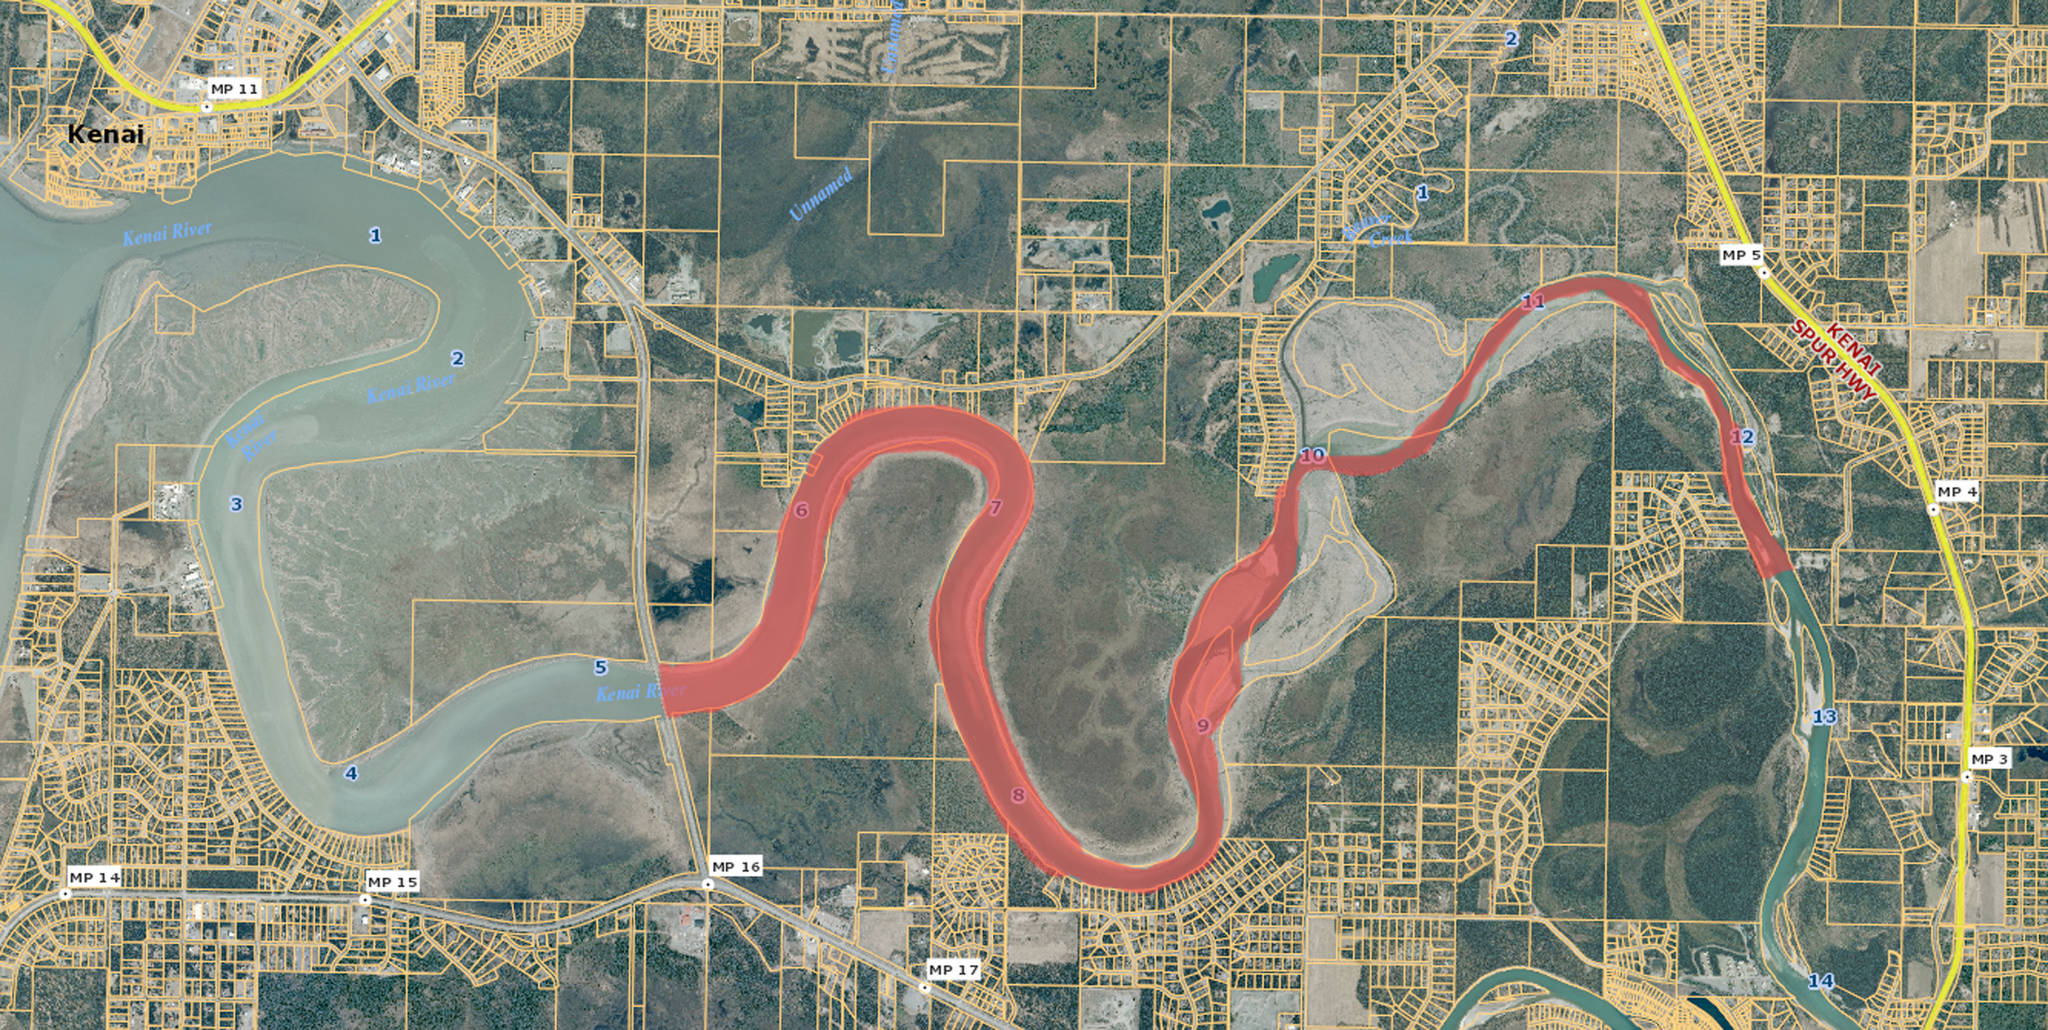 This map shades in red the 7.5 miles of the Kenai River upstream of the Warren Ames Bridge that the Alaska Department of Environmental Conservation seeks to classify as an impaired water body because of its high turbity, or levels of suspended sediment. (Courtesy the Kenai Peninsula Borough)